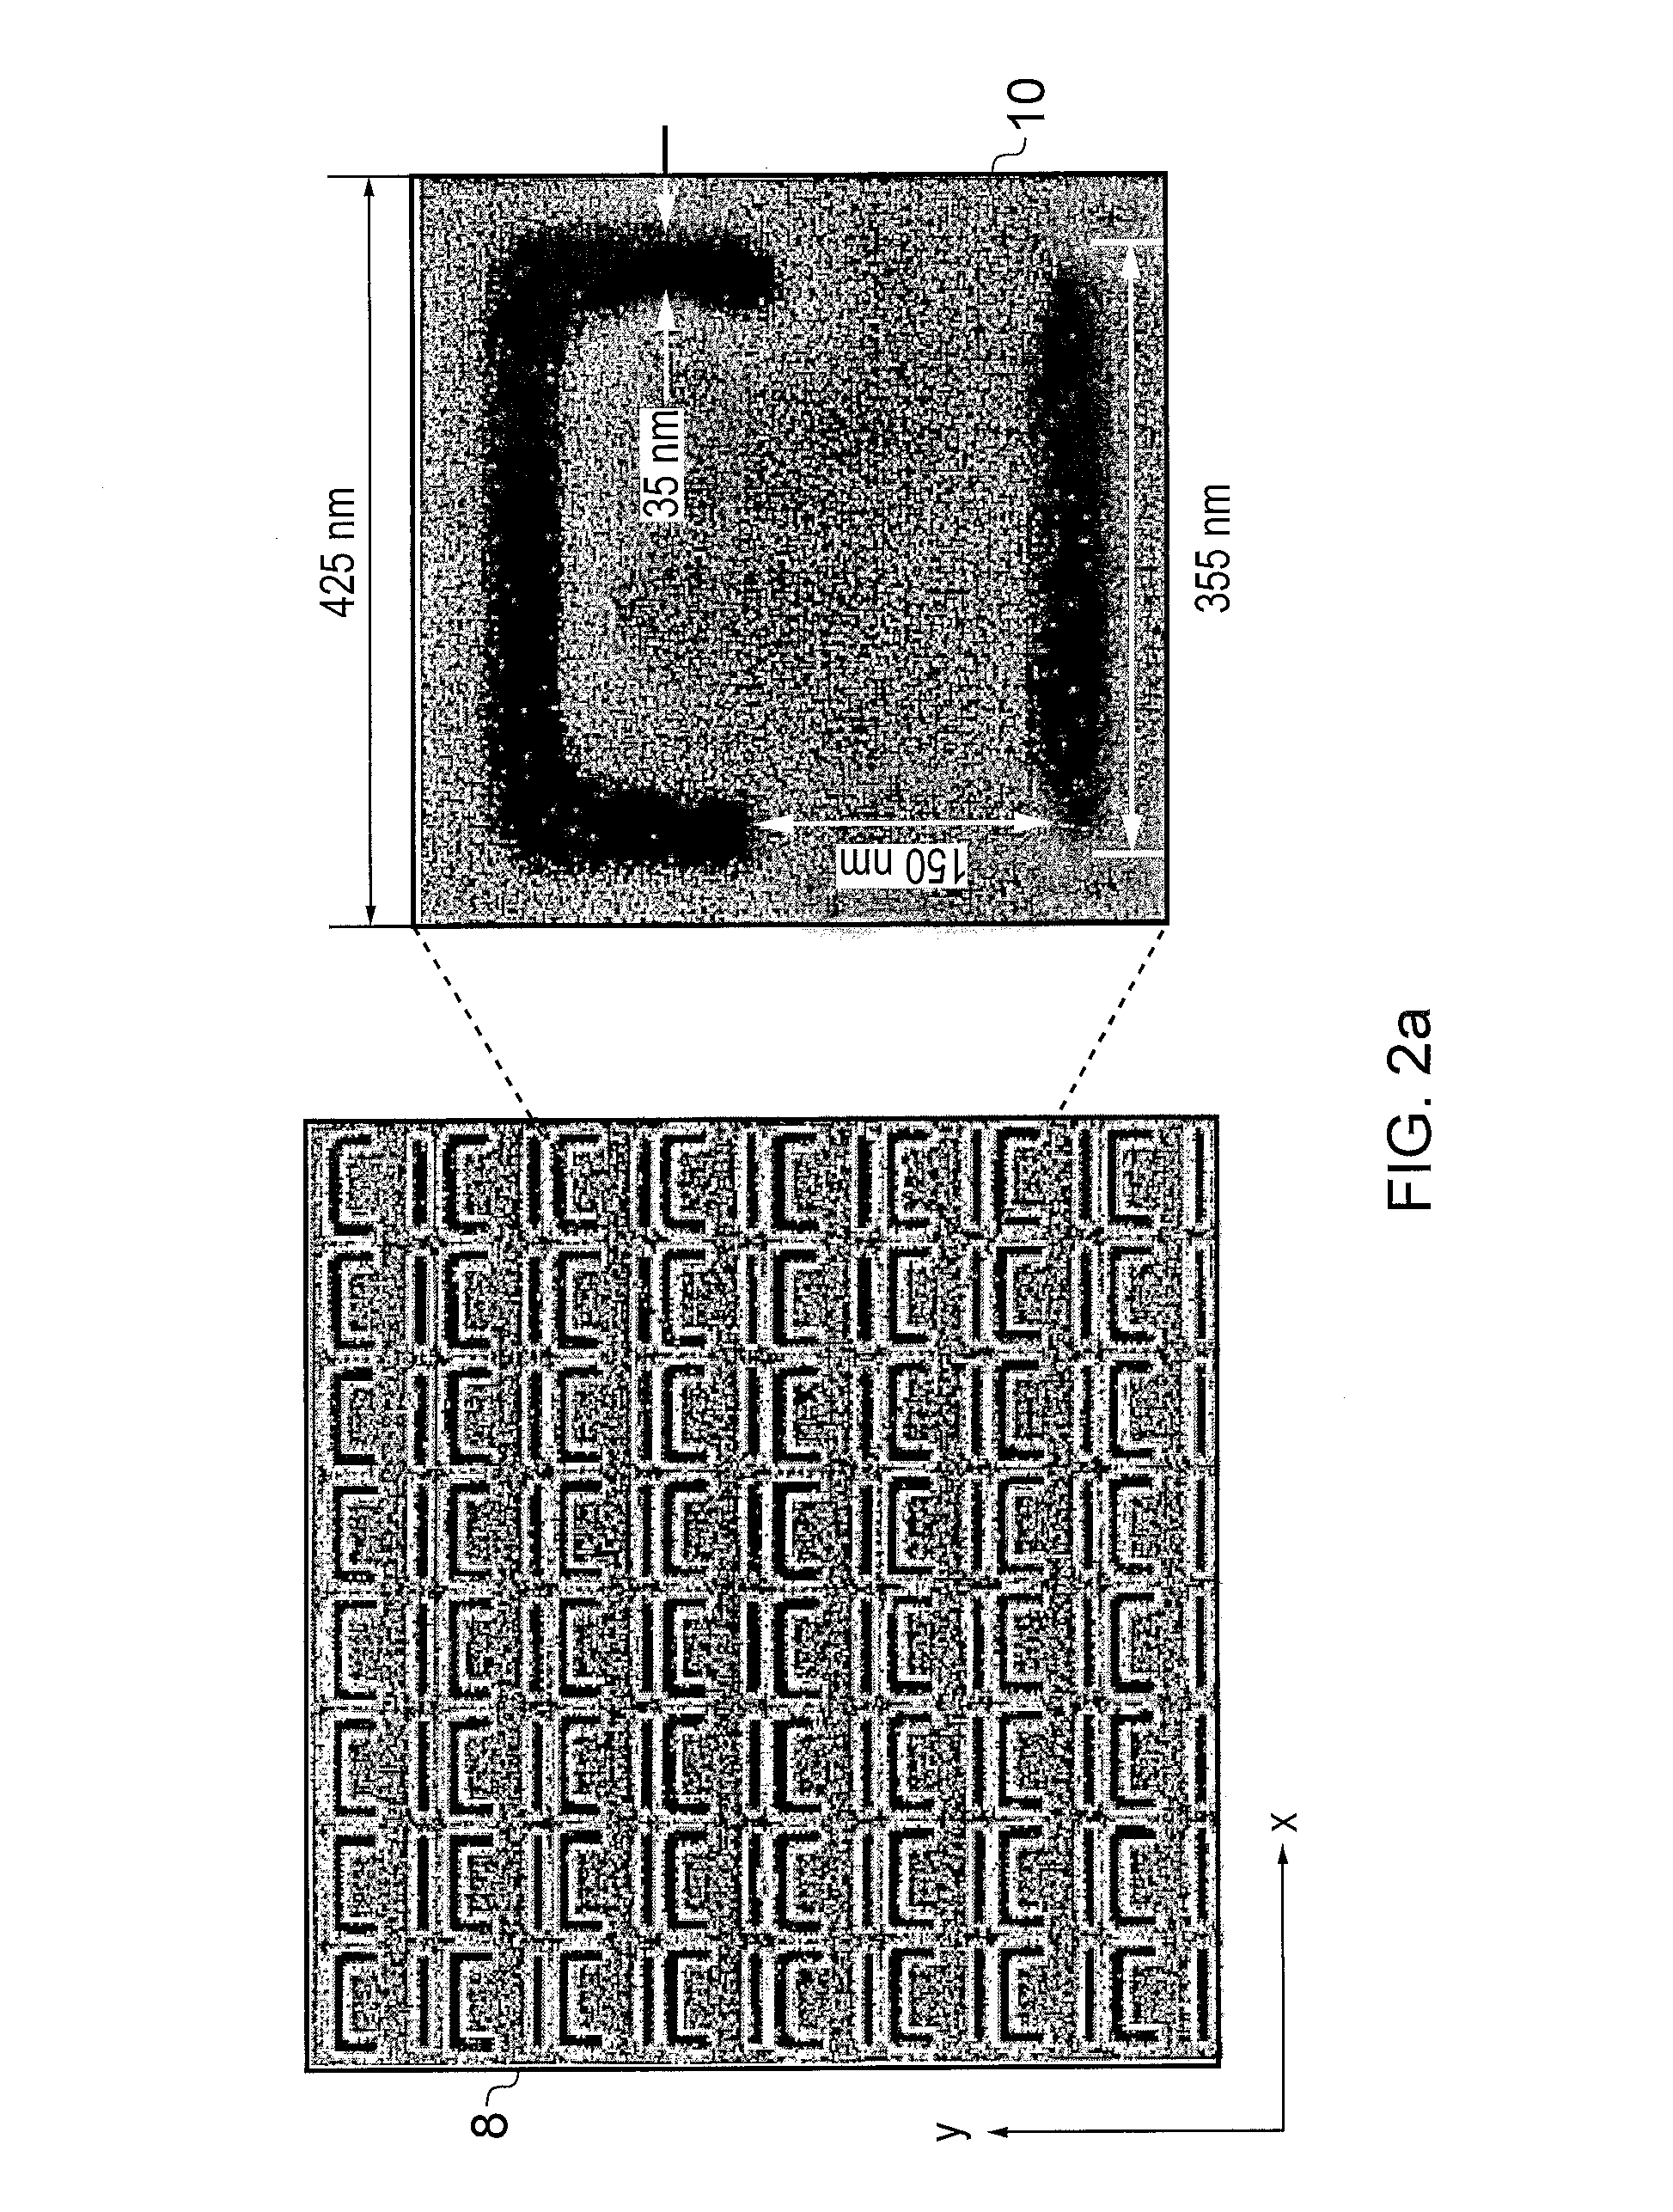 Optical devices, systems and methods